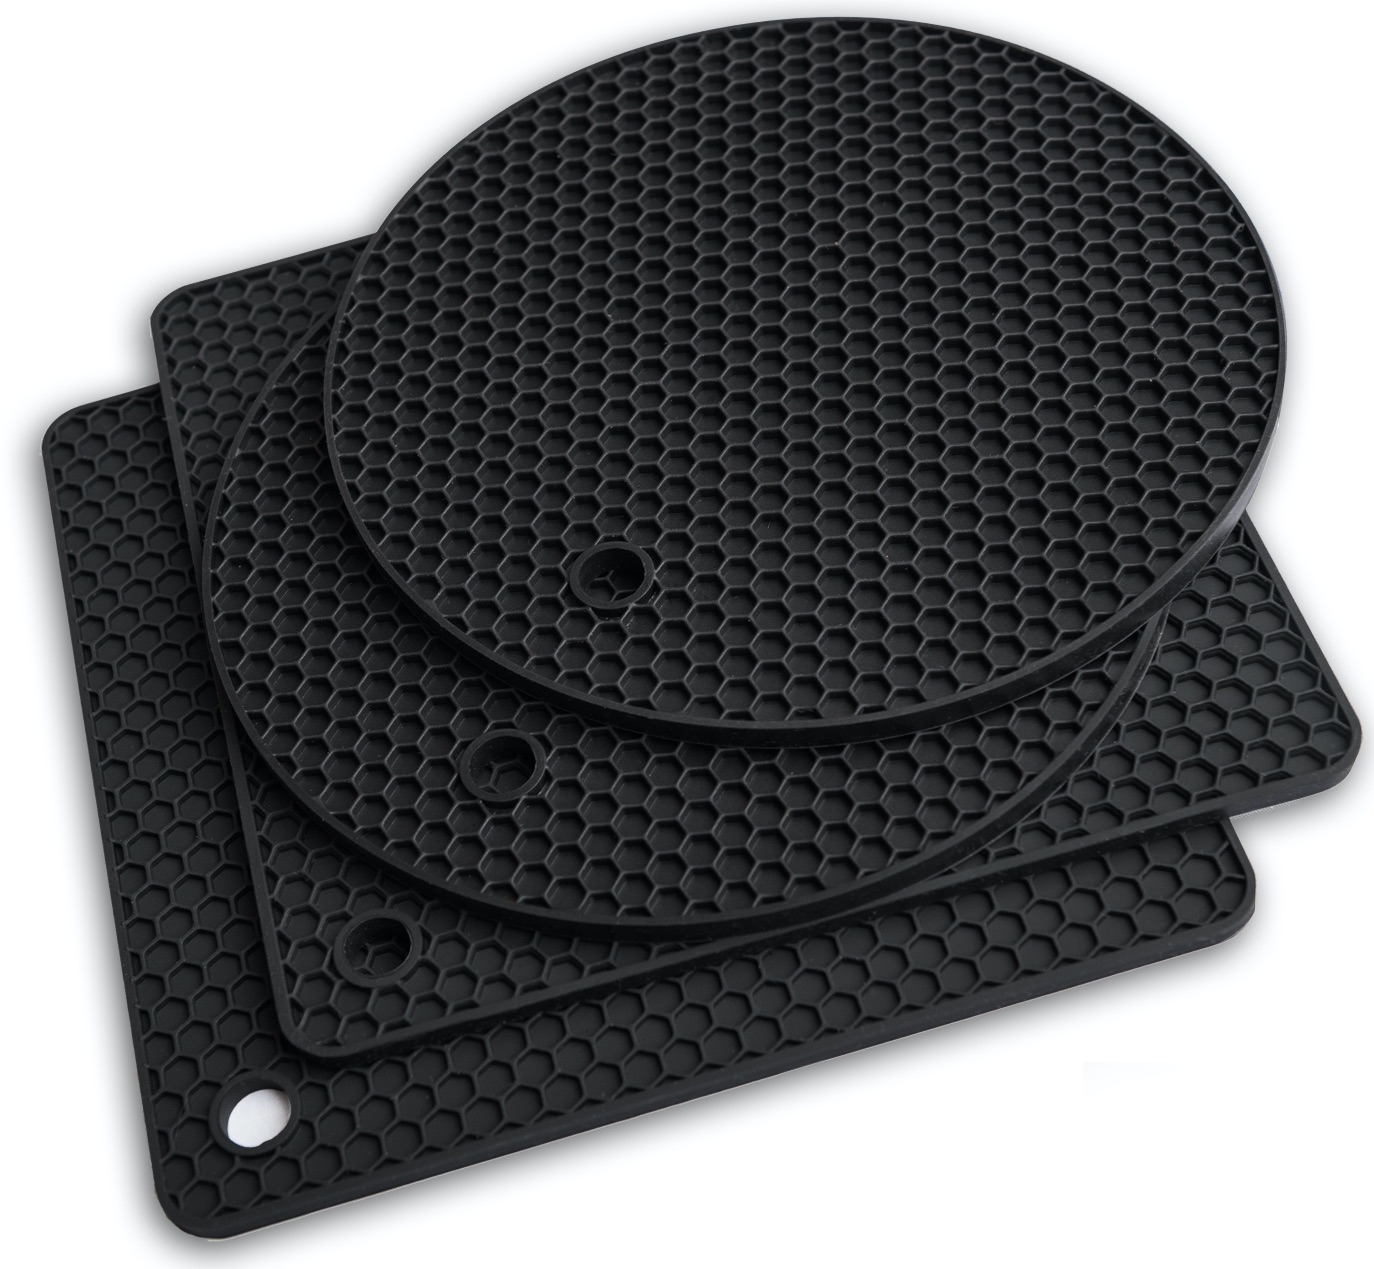 Silicone Trivet Mats – Pot Holders – Drying Mat Our potholders